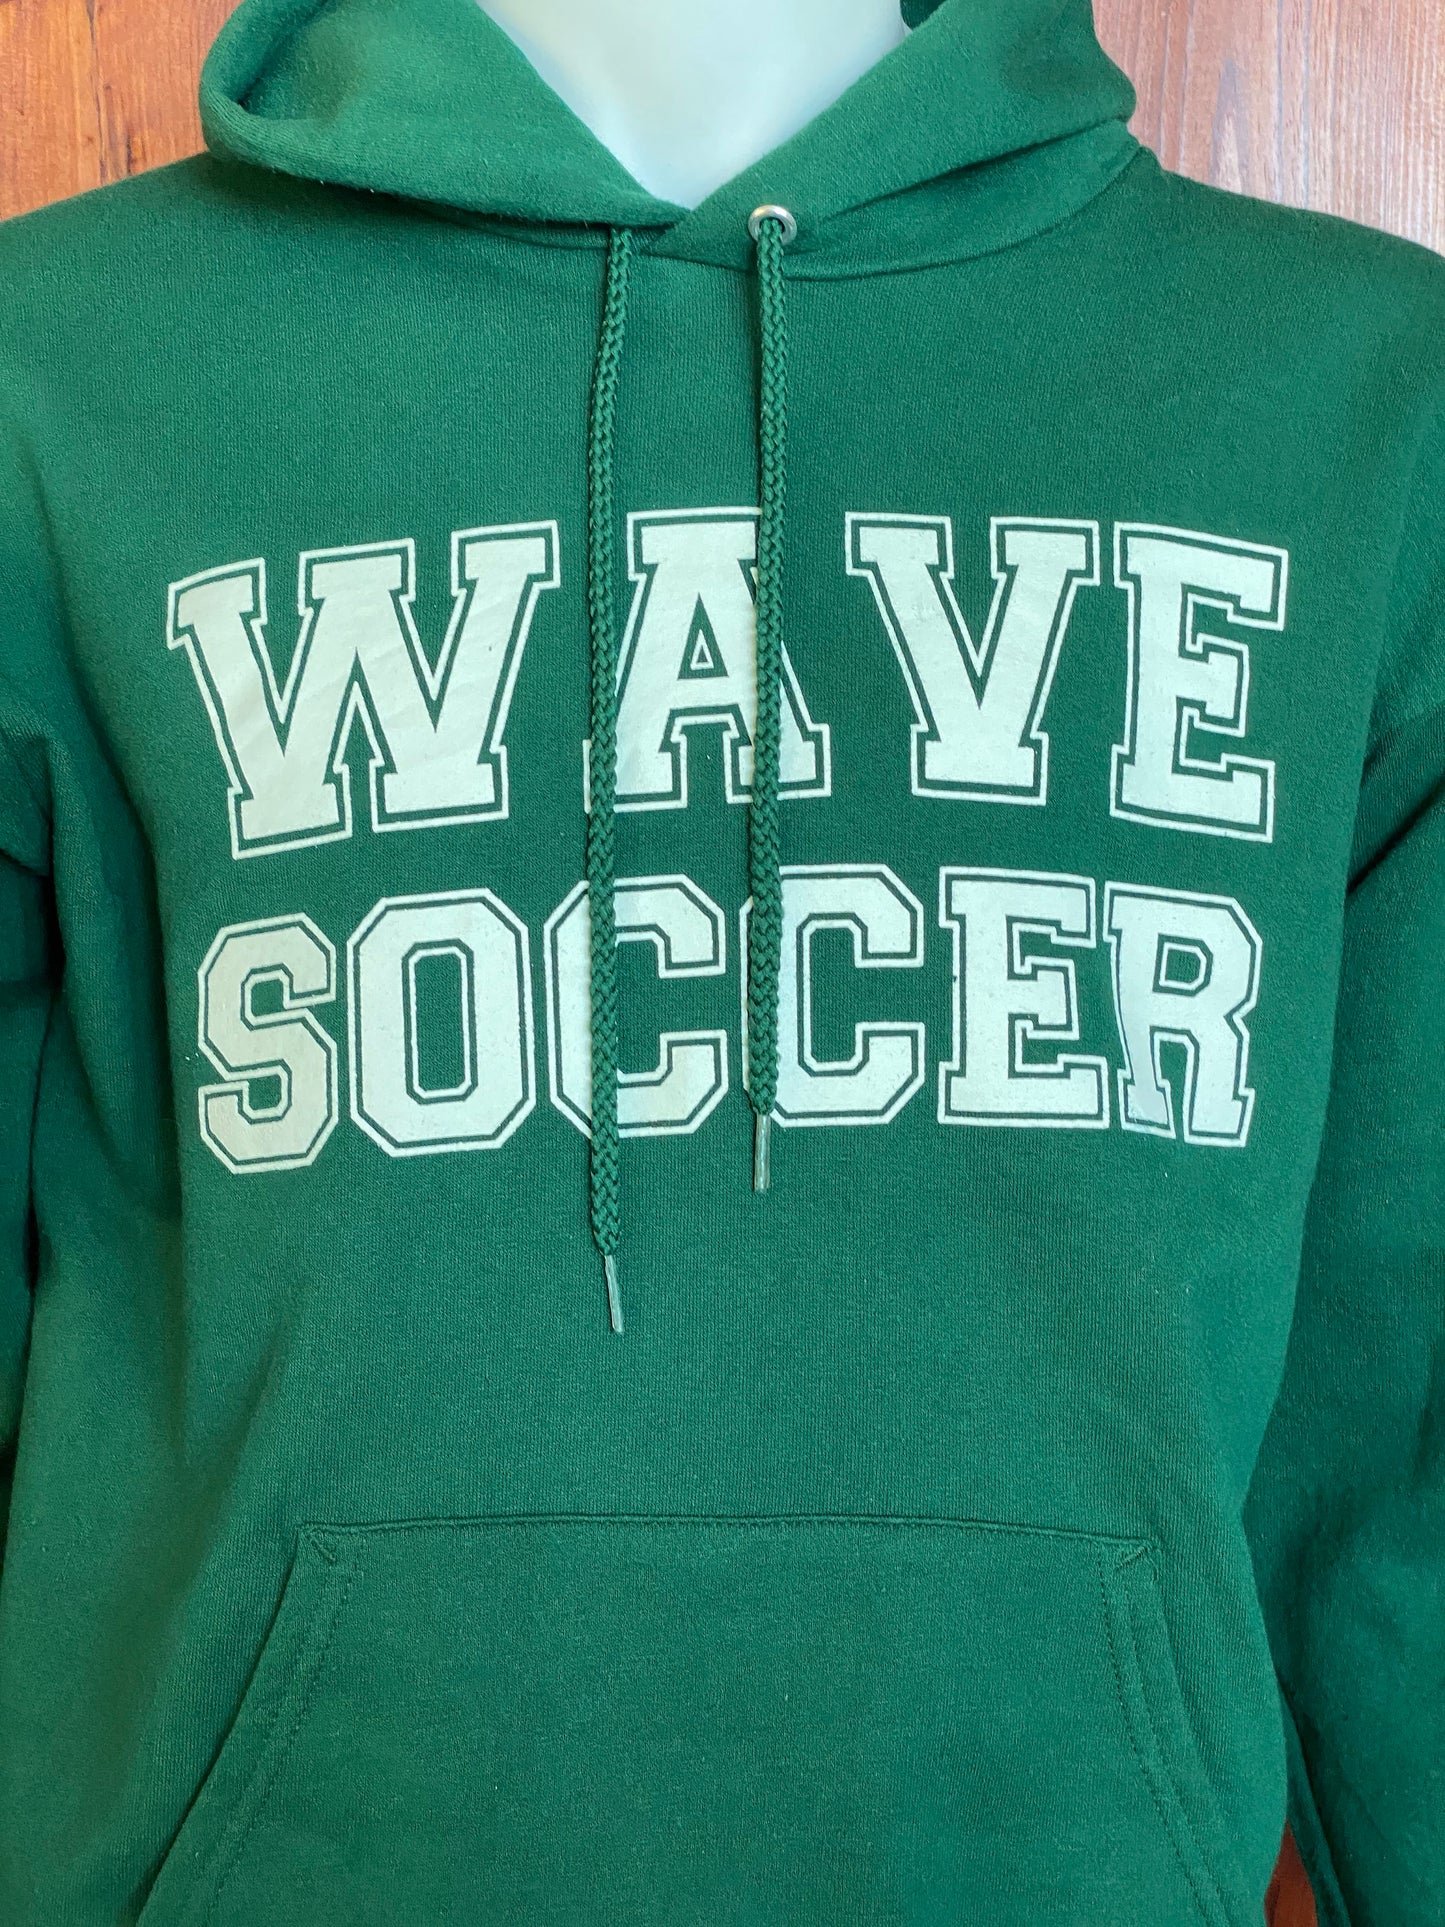 Wave soccer vintage 90s hooded sweatshirt made by Hanes size: M